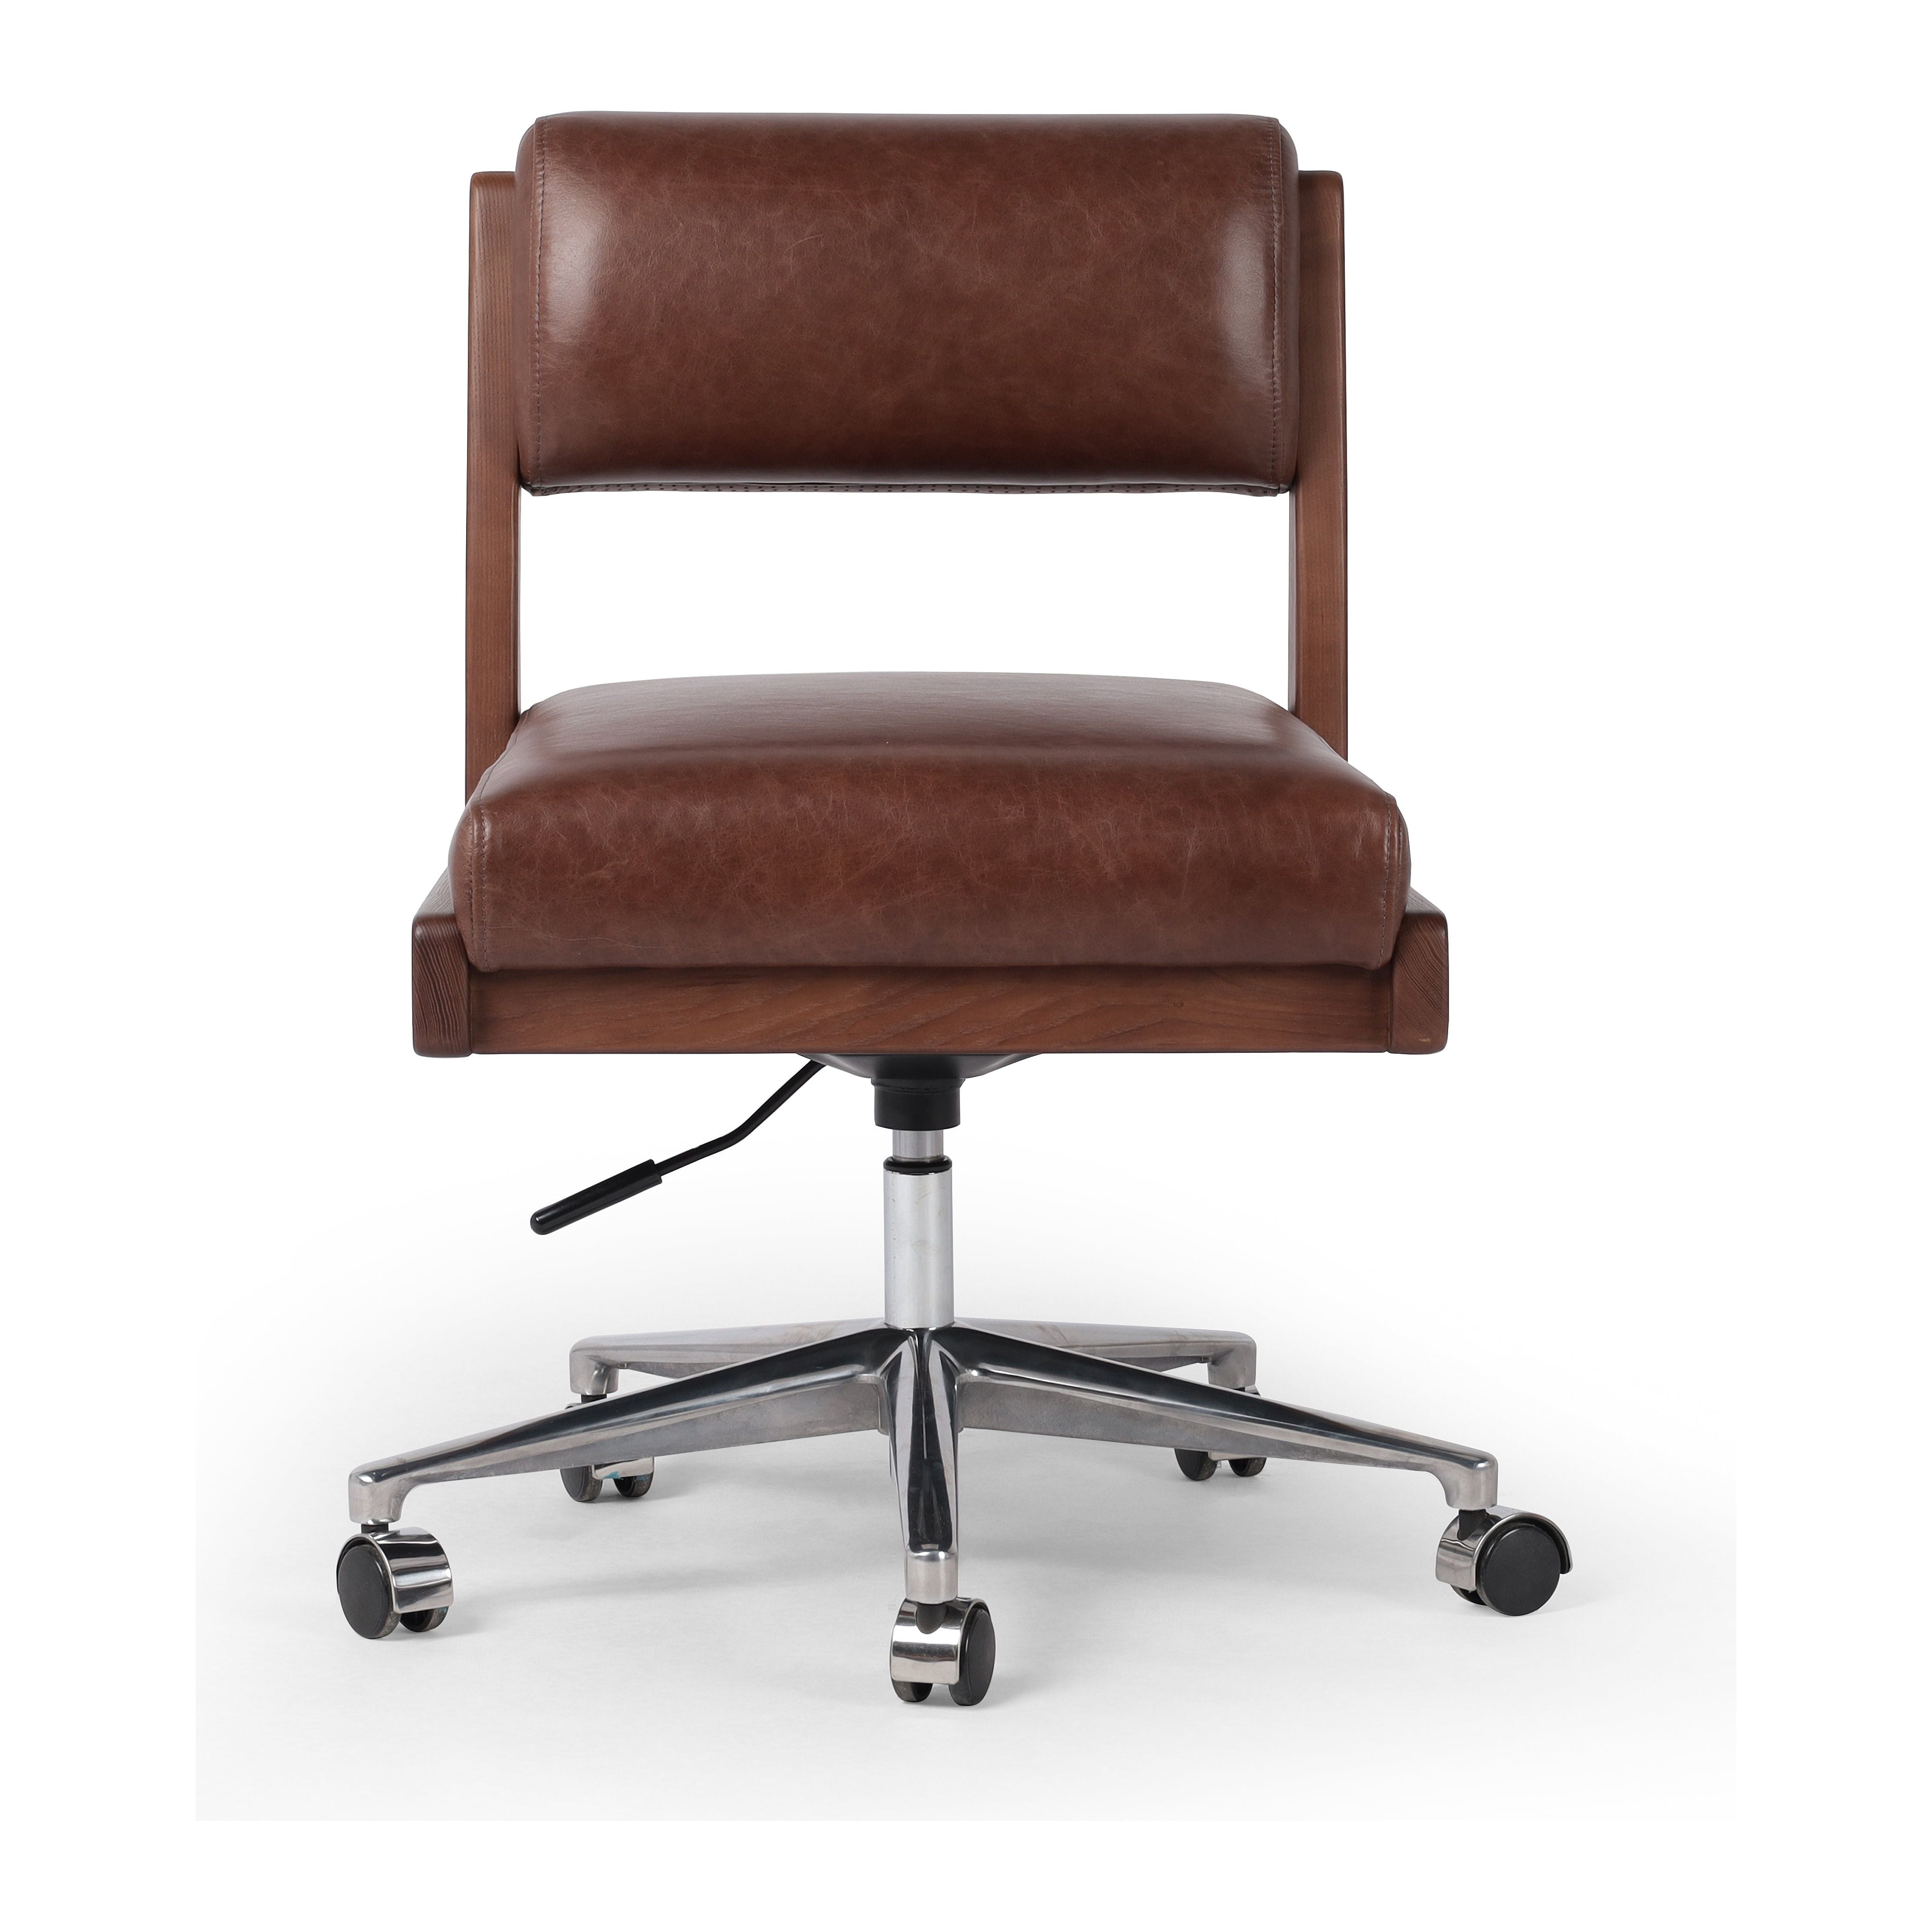 An armless top-grain leather seat and bolster pair with a wooden frame for an understated modern look with a hint of midcentury influence. Amethyst Home provides interior design, new construction, custom furniture, and area rugs in the Boston metro area.